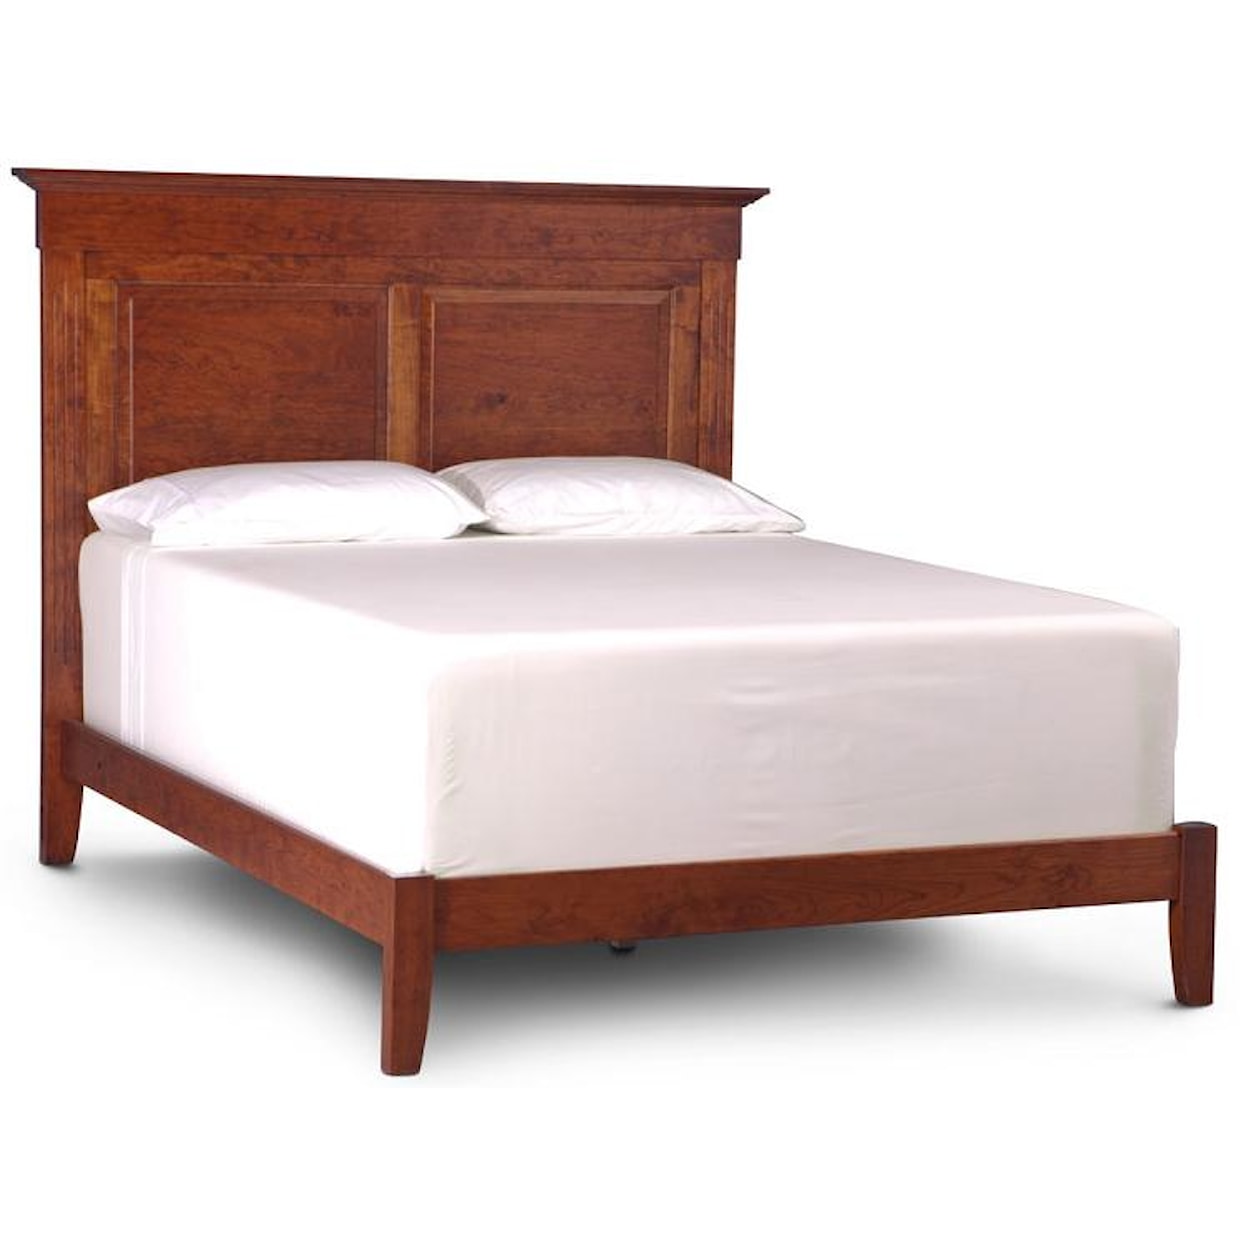 Simply Amish Express Queen Shenandoah Deluxe Bed with Wood Frame 